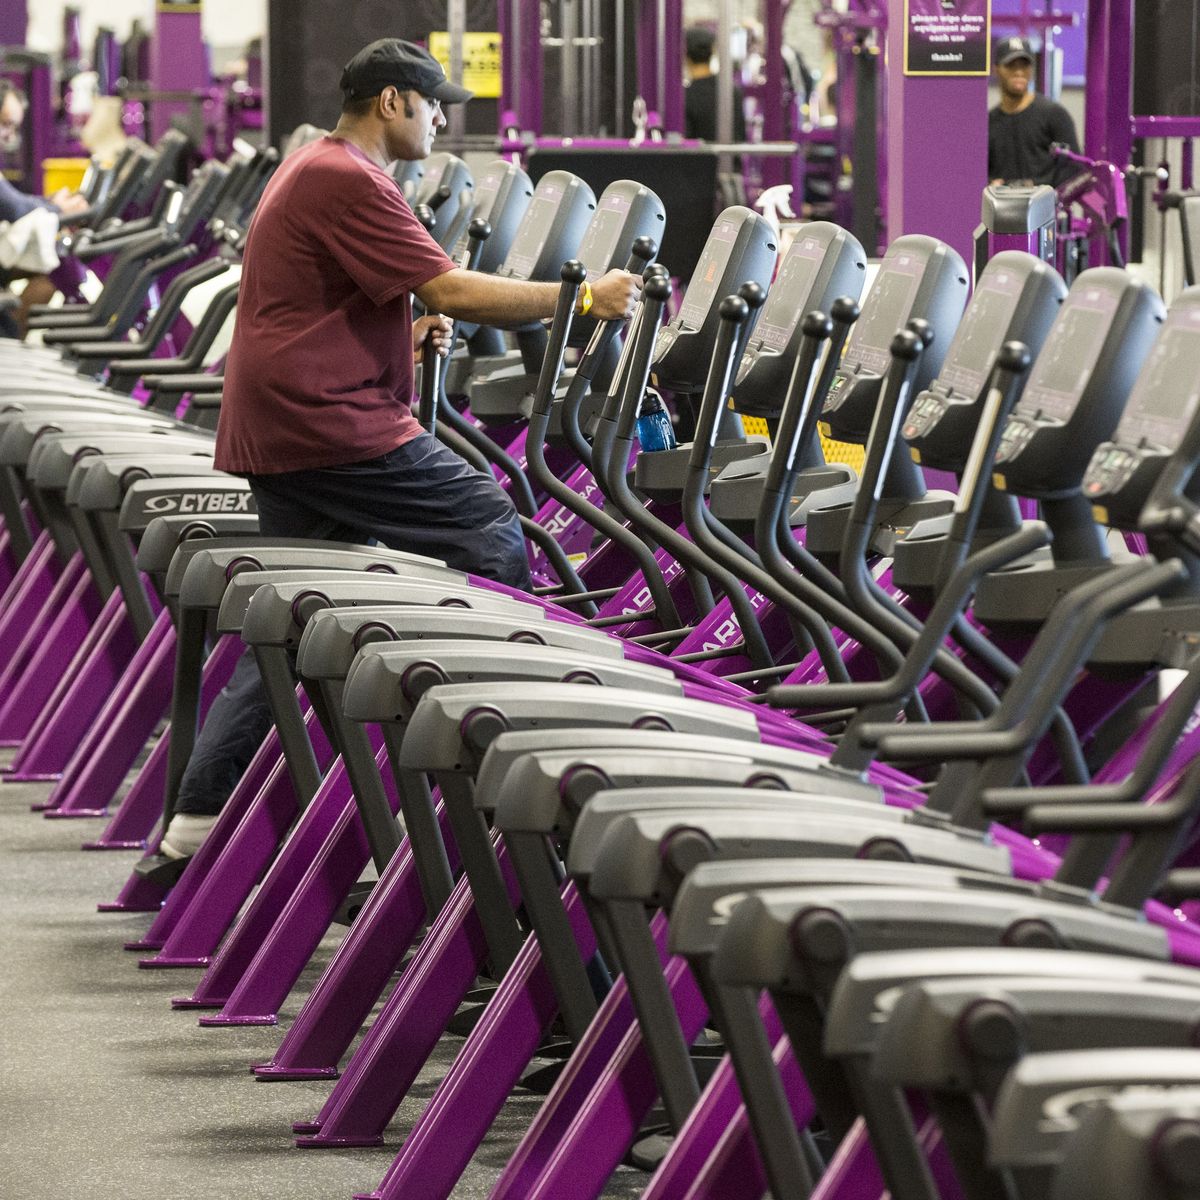 planet fitness labor day hours 2020